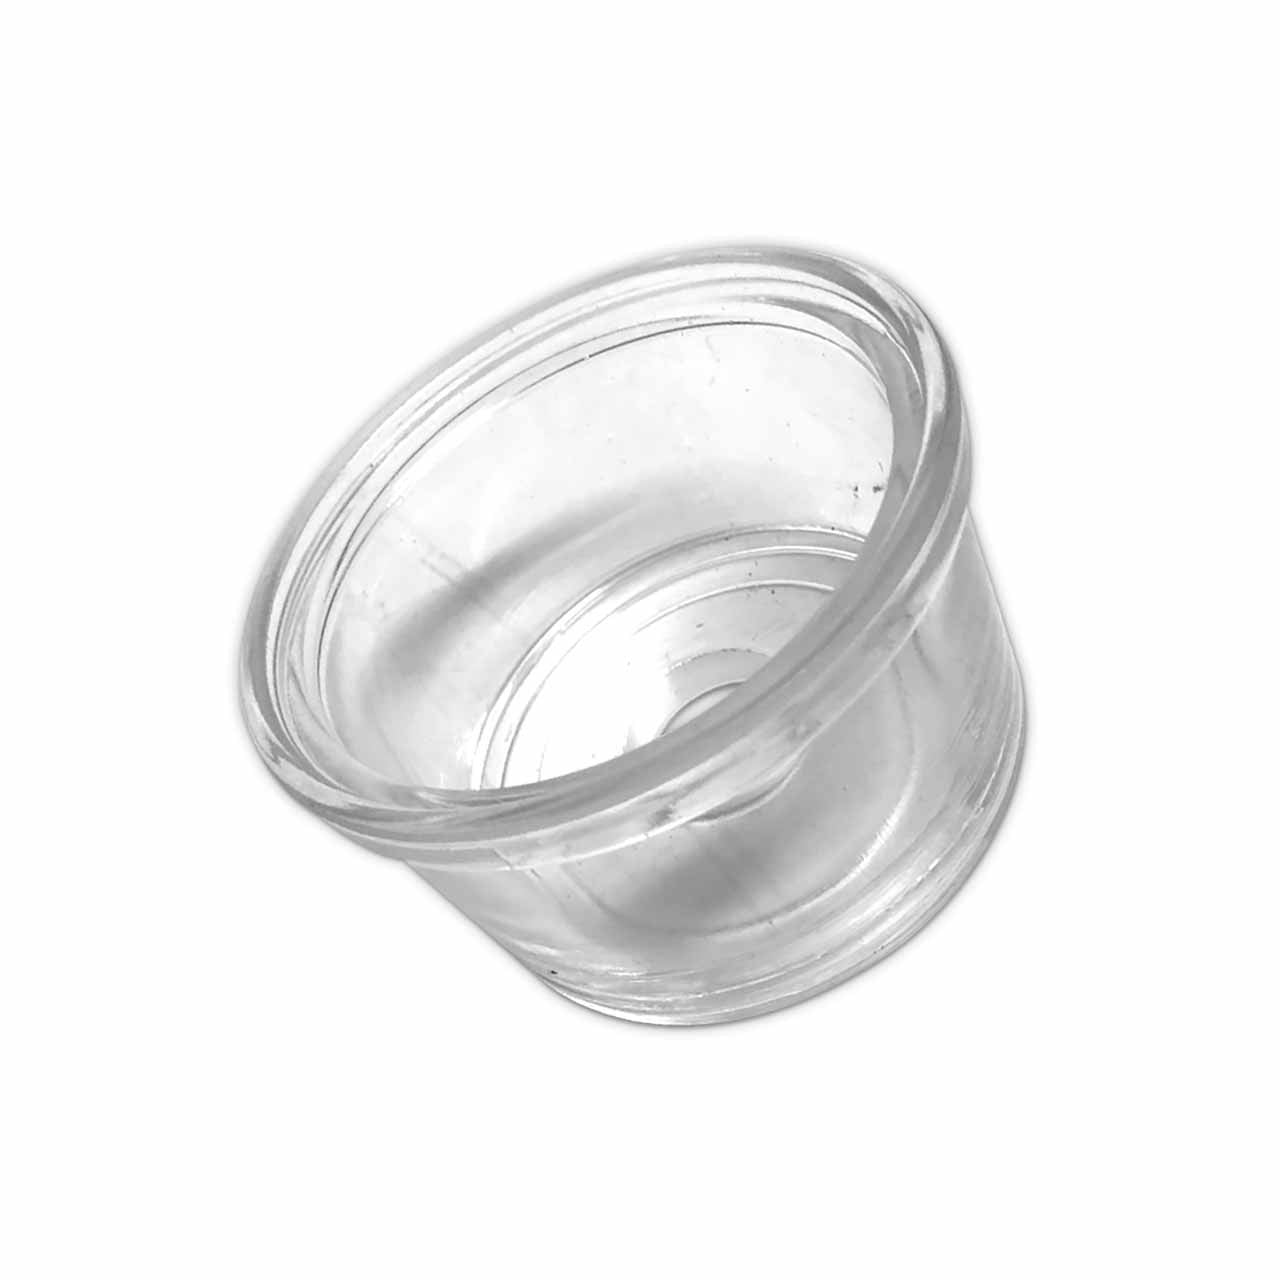 D7111-403 Replacement See-Through Bowl for Delphi C.A.V. Pre Filter 5836B100